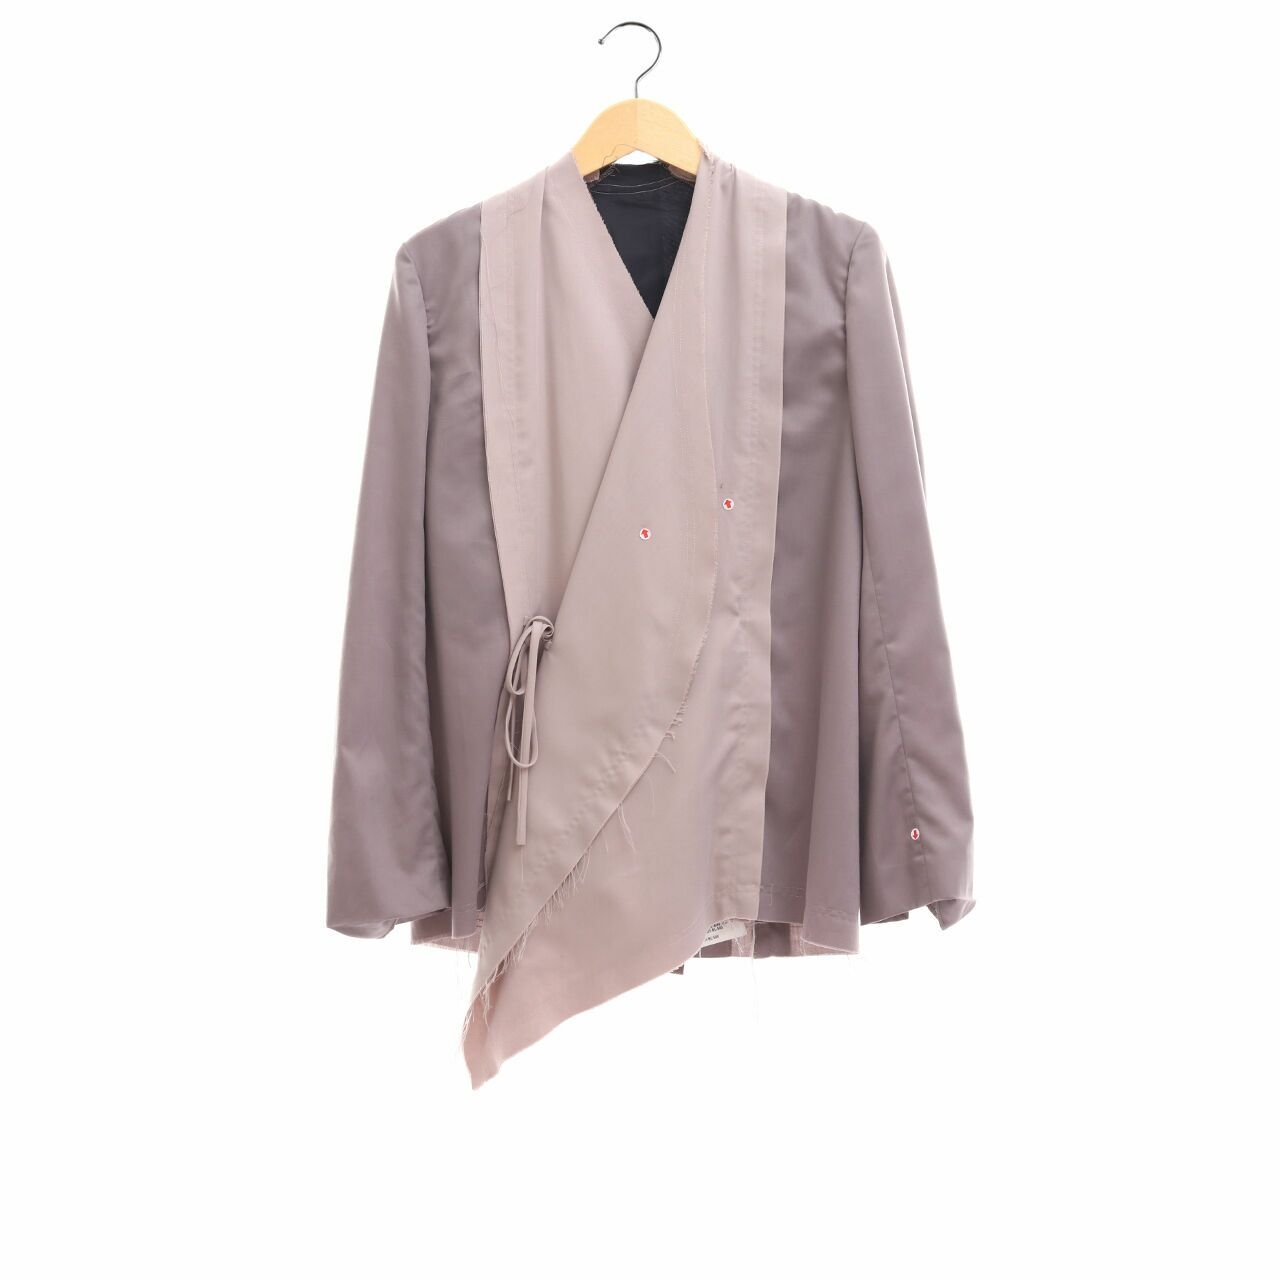 Private Collection Grey & Taupe Wrap Blouse